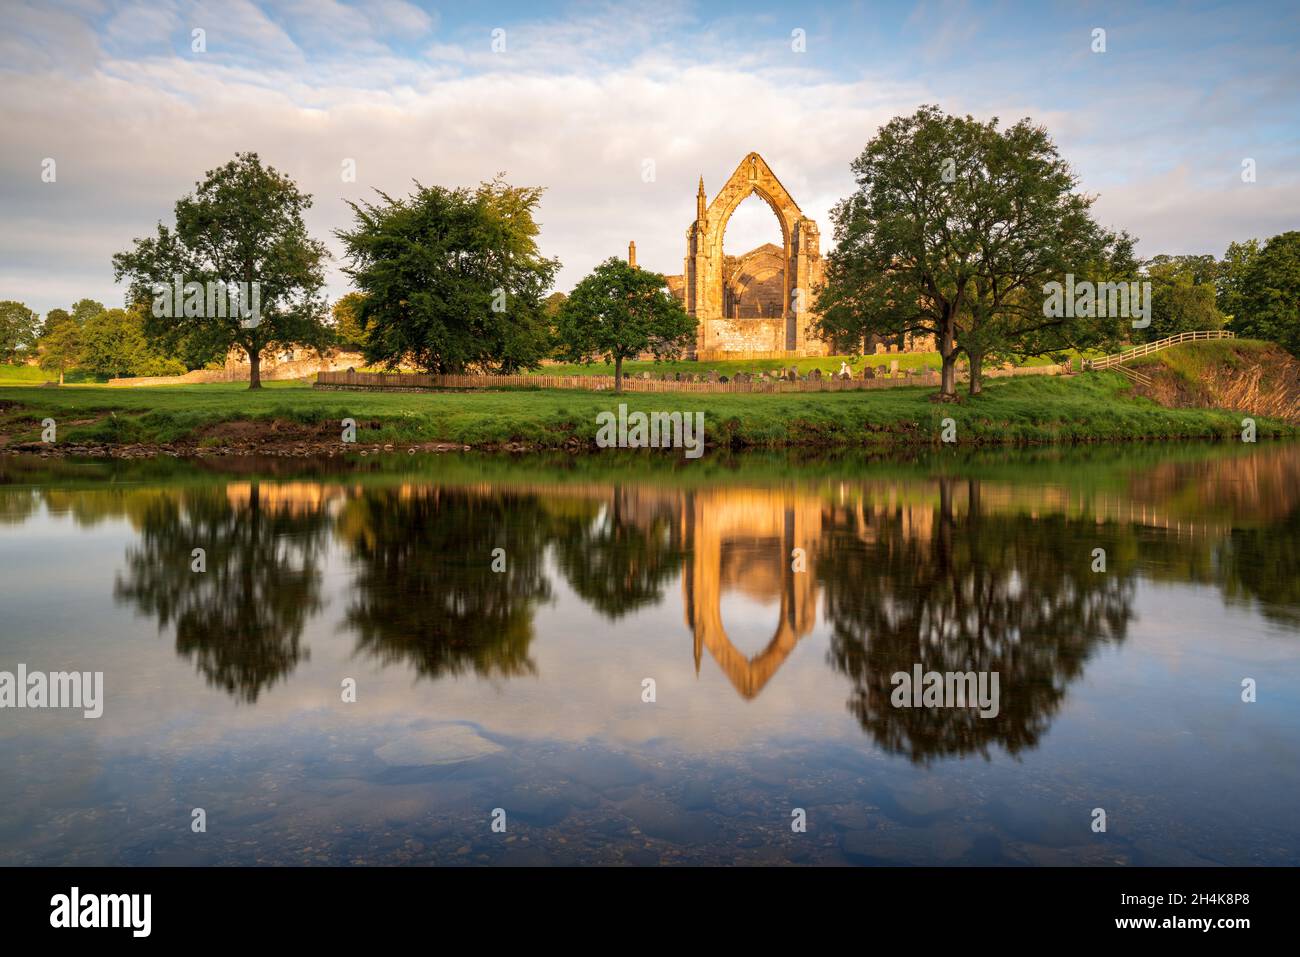 Bolton Abbey catches the first direct light of a beautiful summer morning, with the old ruin reflected in the slow flowing River Wharfe beneath. Stock Photo